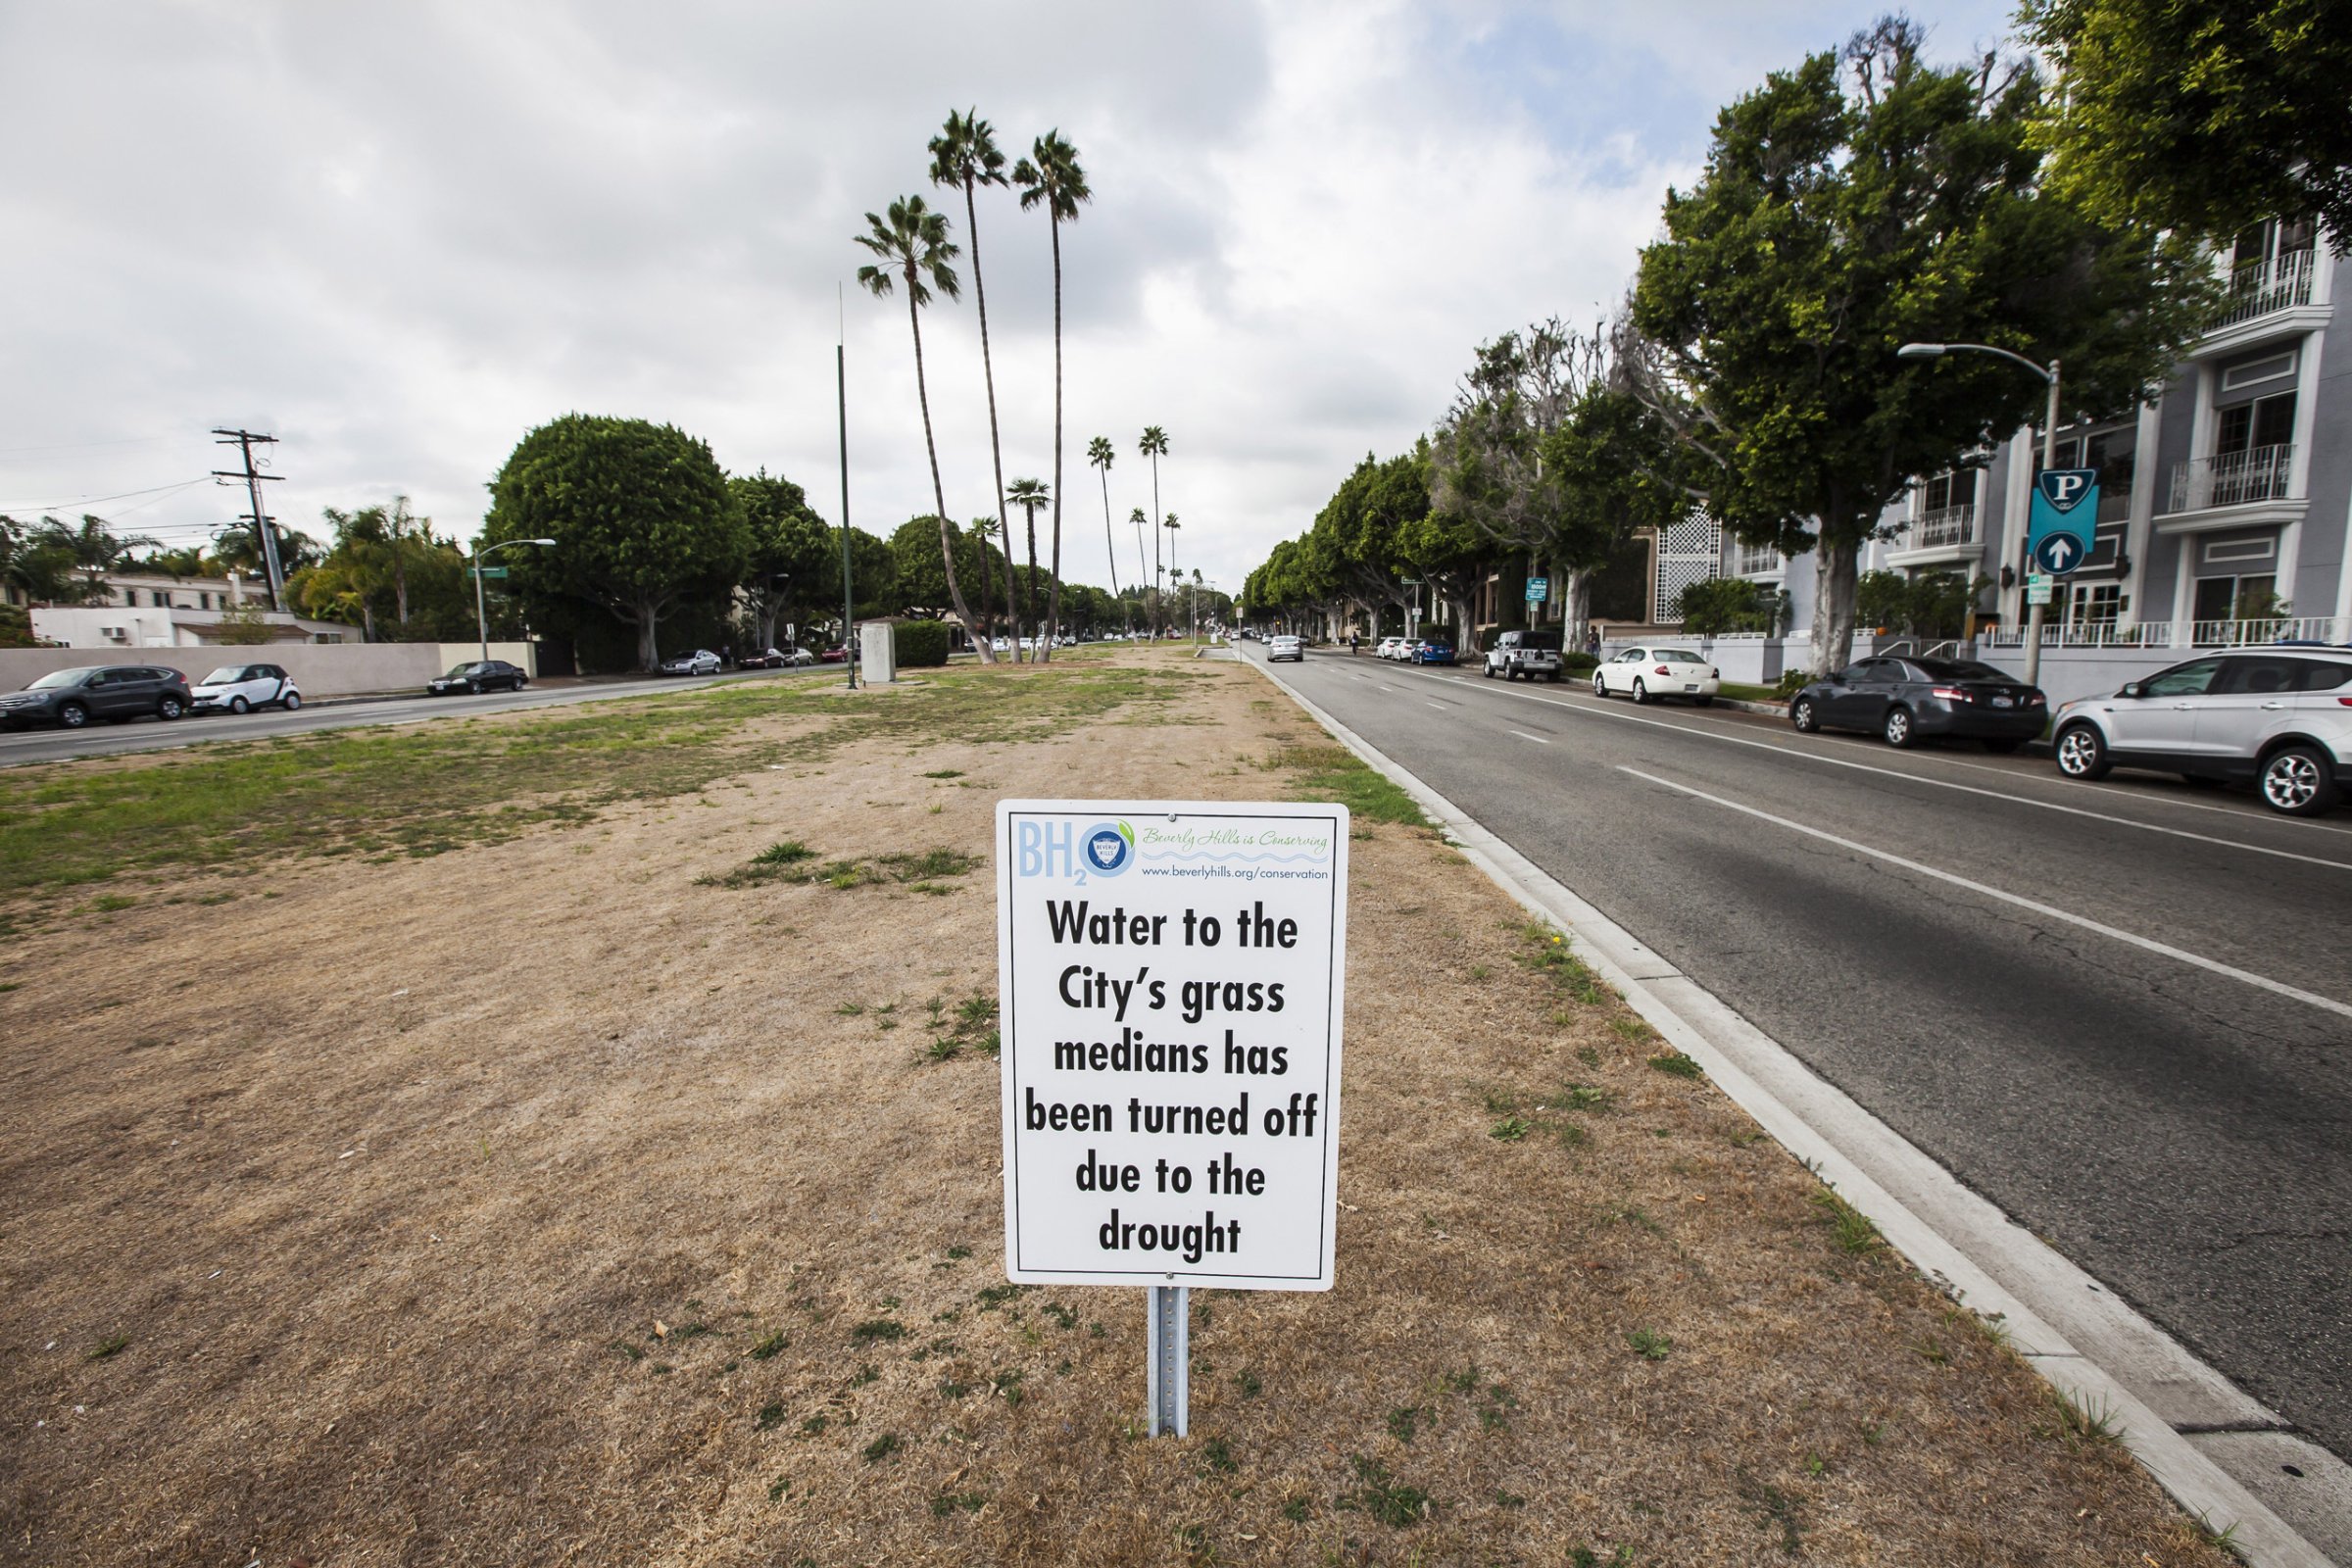 02 Nov 2015, Beverly Hills, California, USA --- The City of Beverly Hills along with three other California cities was fined $61,000 by the state's water resources board for water wasting. The city has not cut back on water use and not met the state's requirements for water saving cut backs due to the severe drought. The wealthy residents of Beverly Hills on average use 3 to 4 times more water per household than neighboring cities. --- Image by © Ted Soqui/Ted Soqui Photography/Corbis